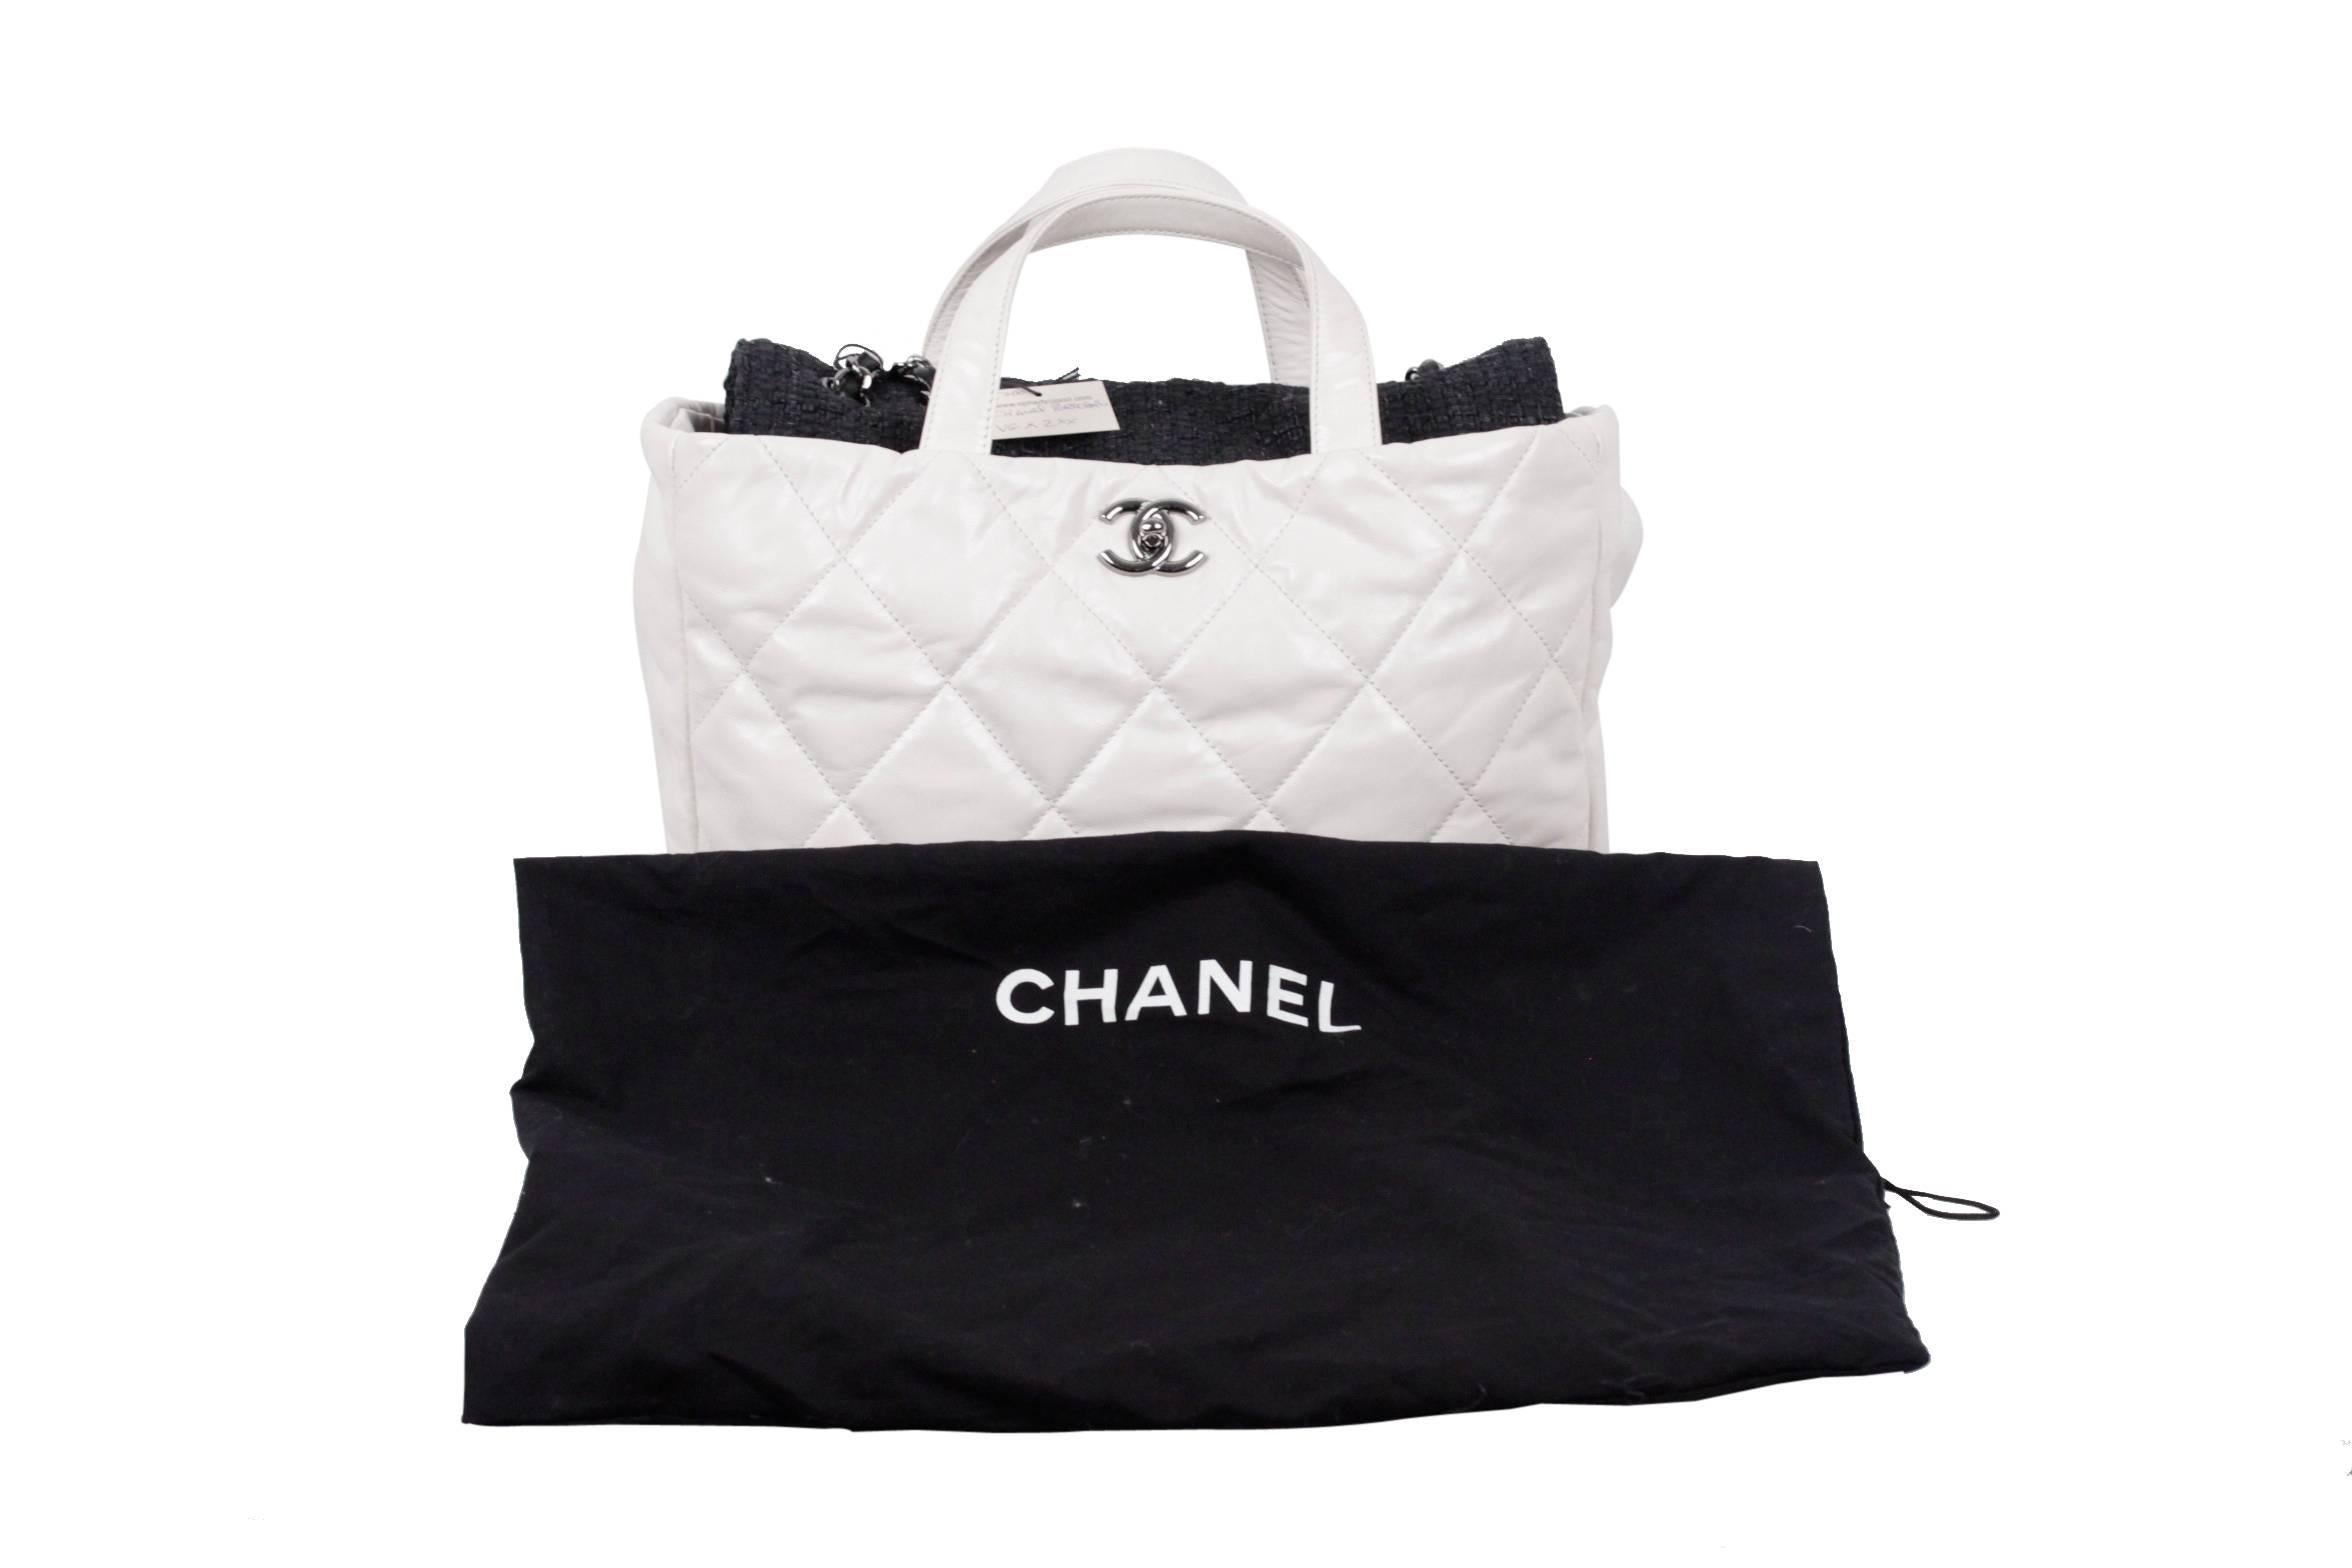 CHANEL White QUILTED Leather PORTOBELLO Tweed Flap TOTE Shoulder Bag 2